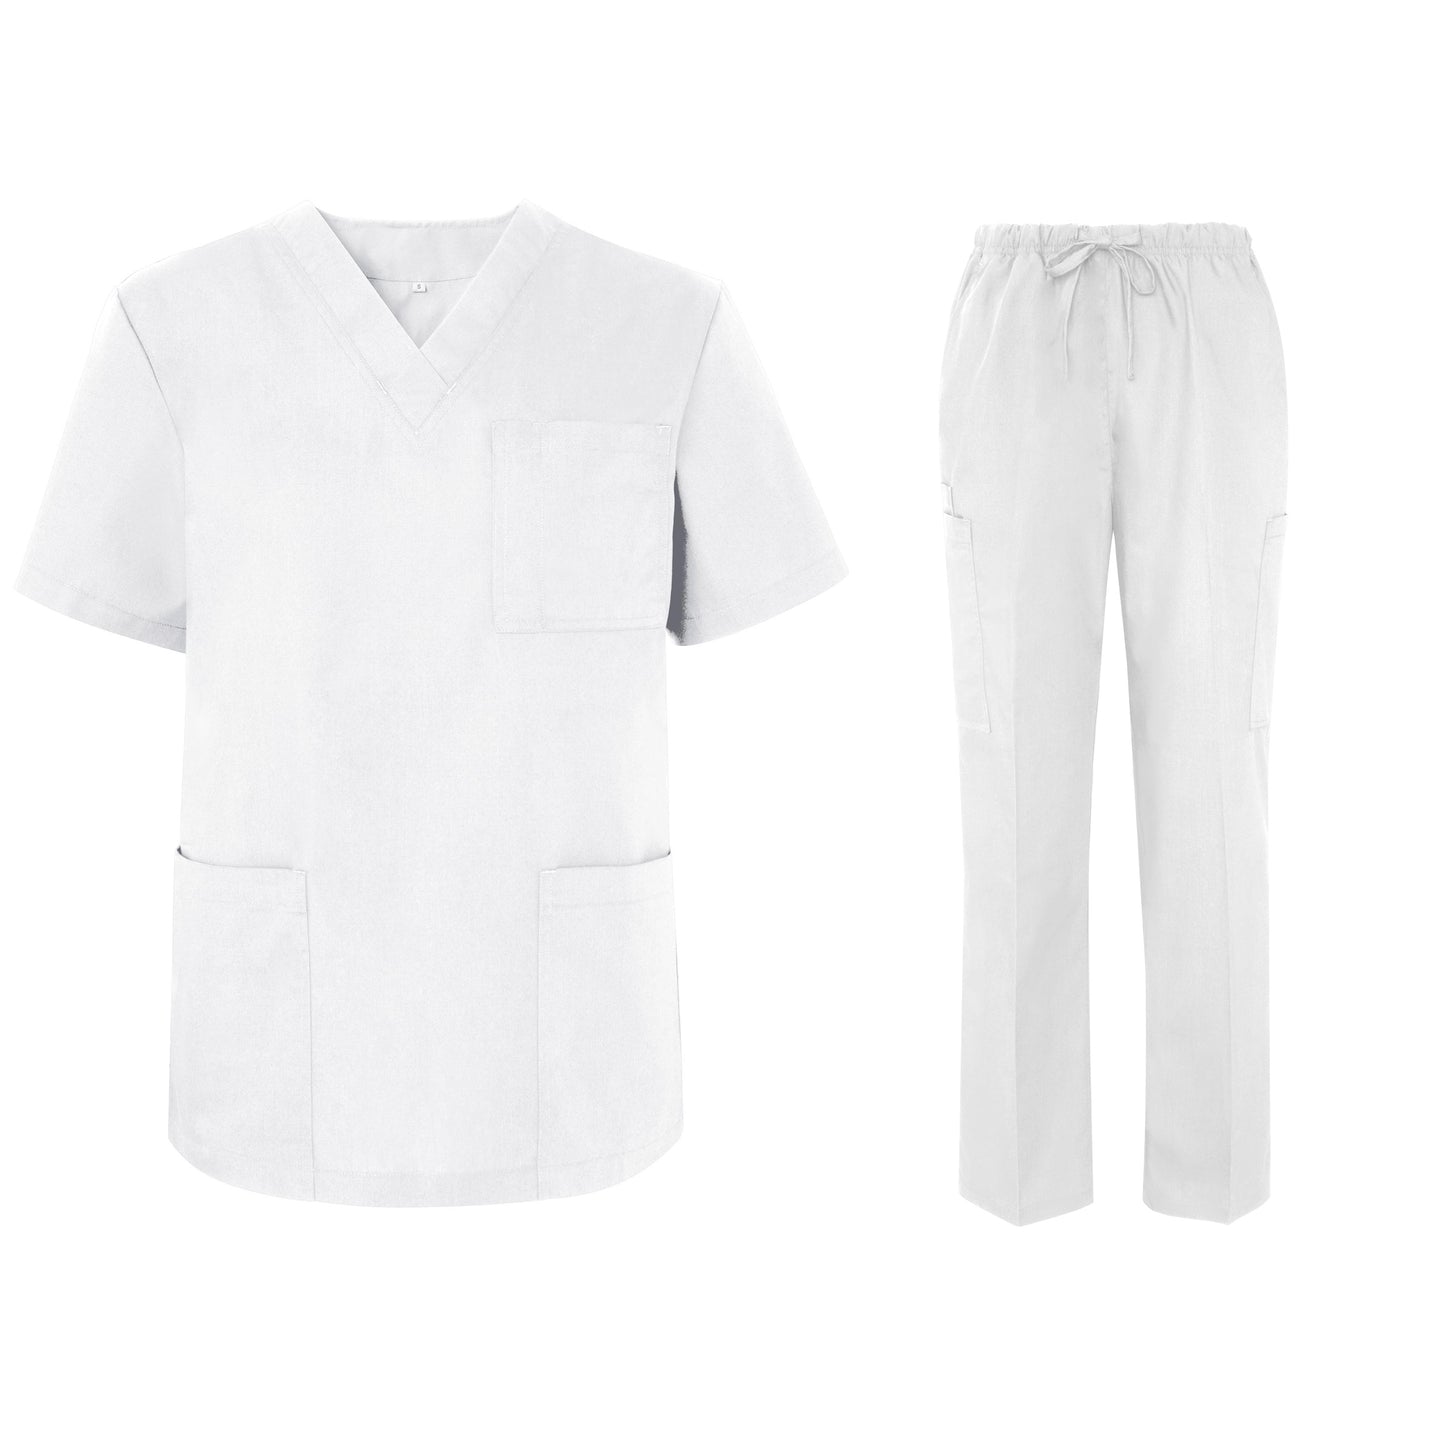 Unisex Scrubs, V-neck Top With Multi Cargo Pocket Pants *ALL SALES ARE FINAL*